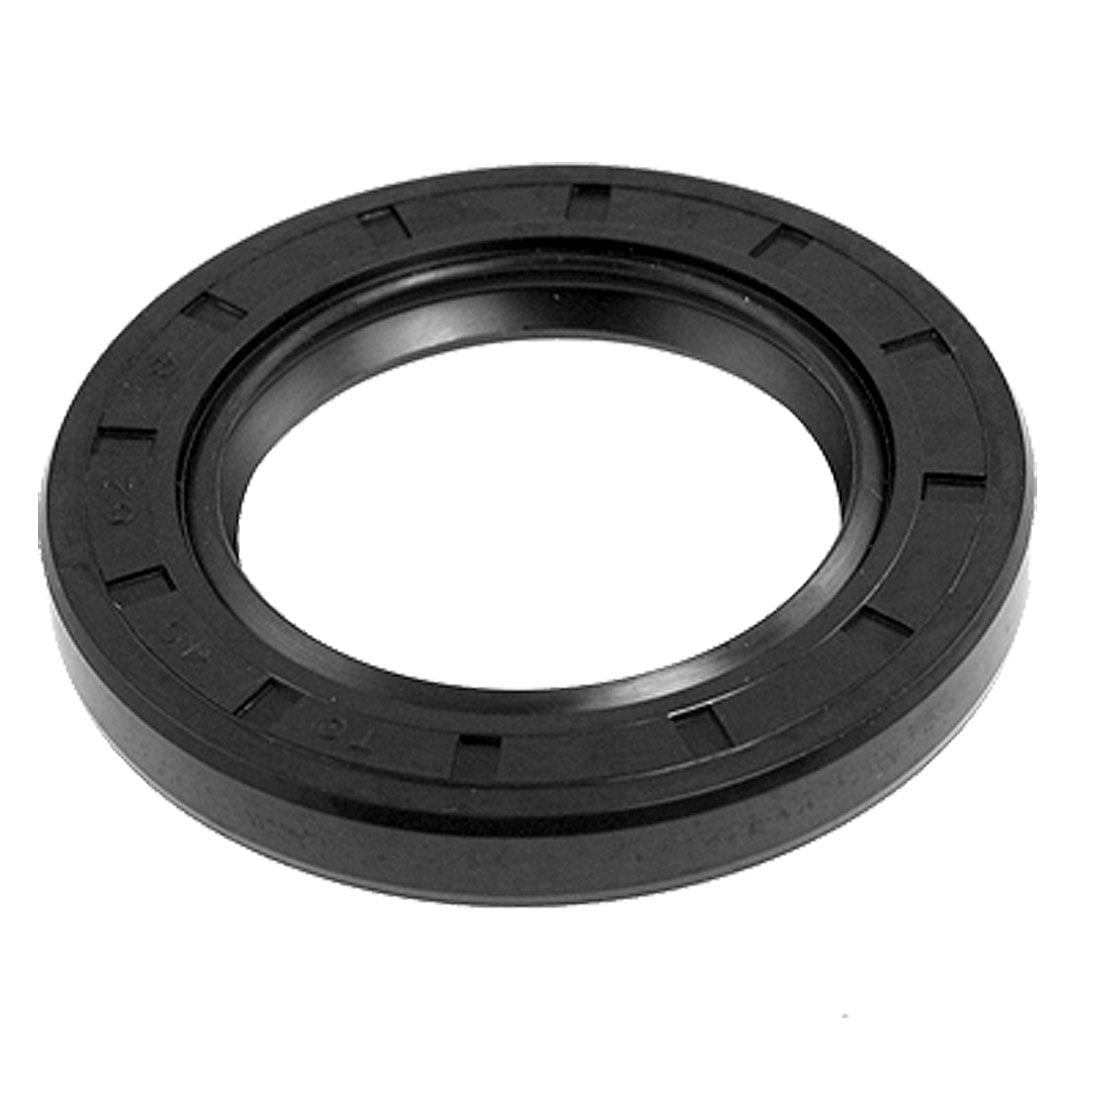 Metric Oil Shaft Seal 20 x 40 x 8mm Double Lip  Price for 1 pc 